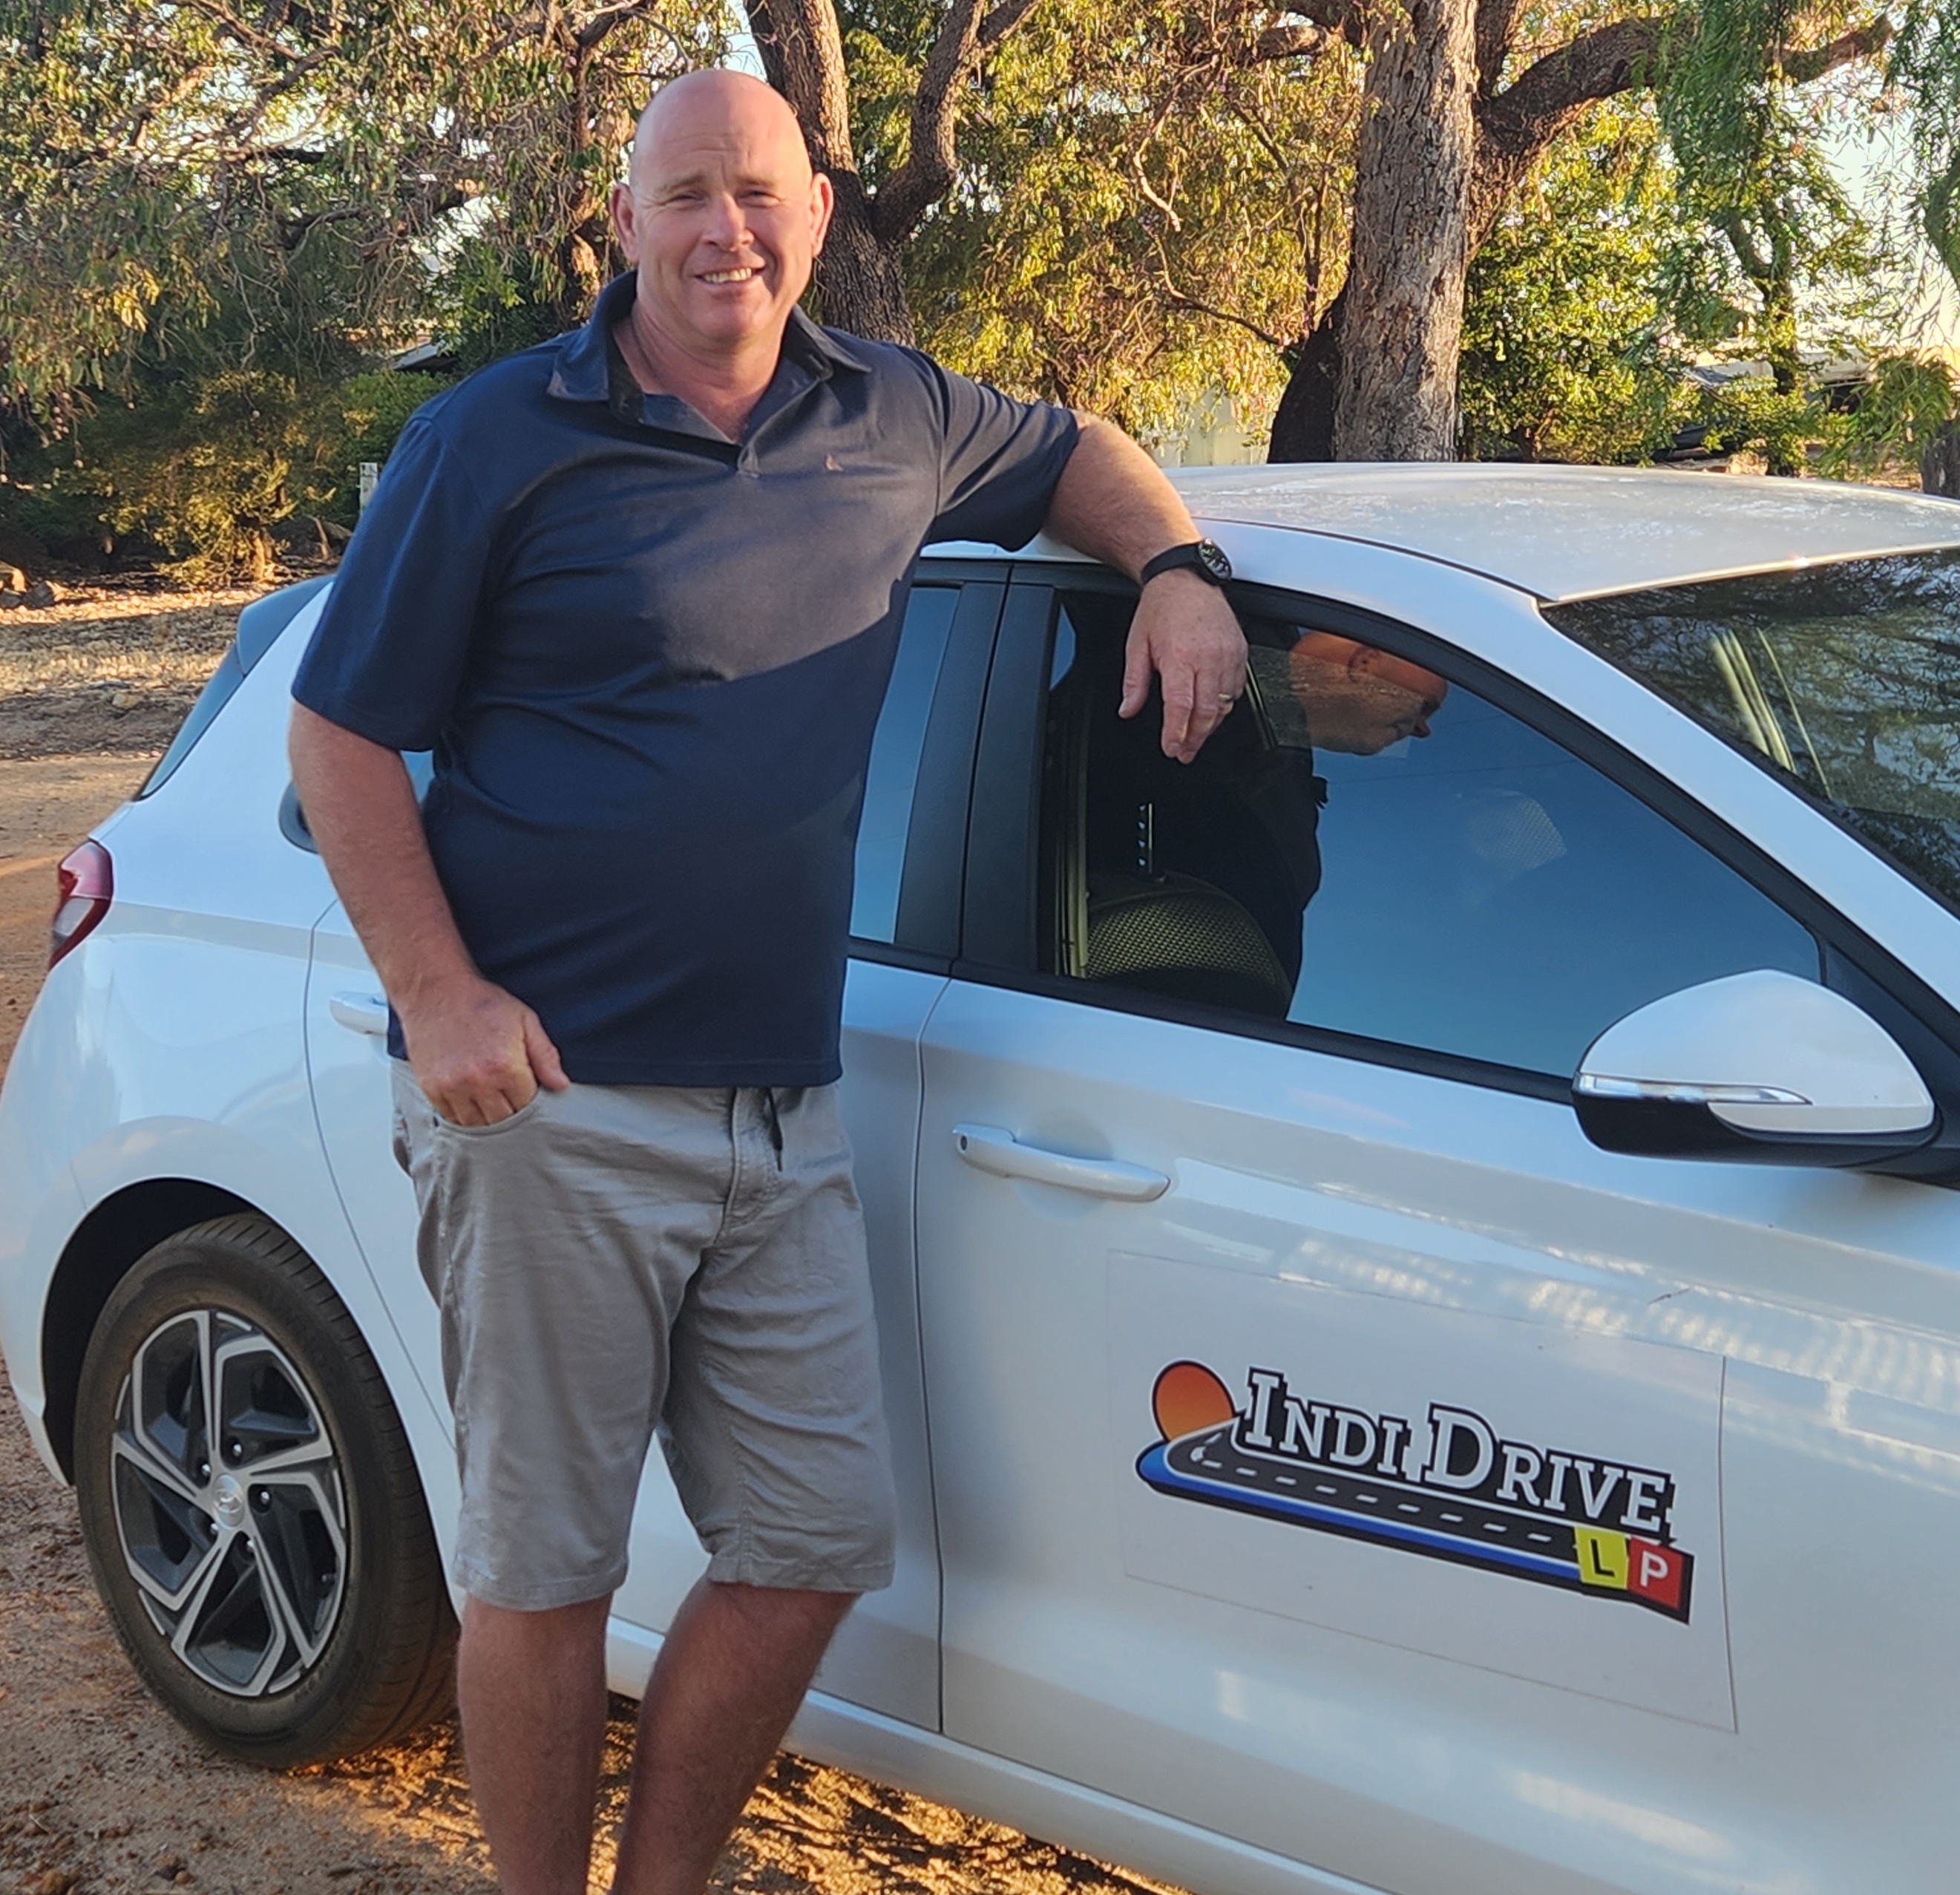 Greg Automatic Driving Instructor Midland